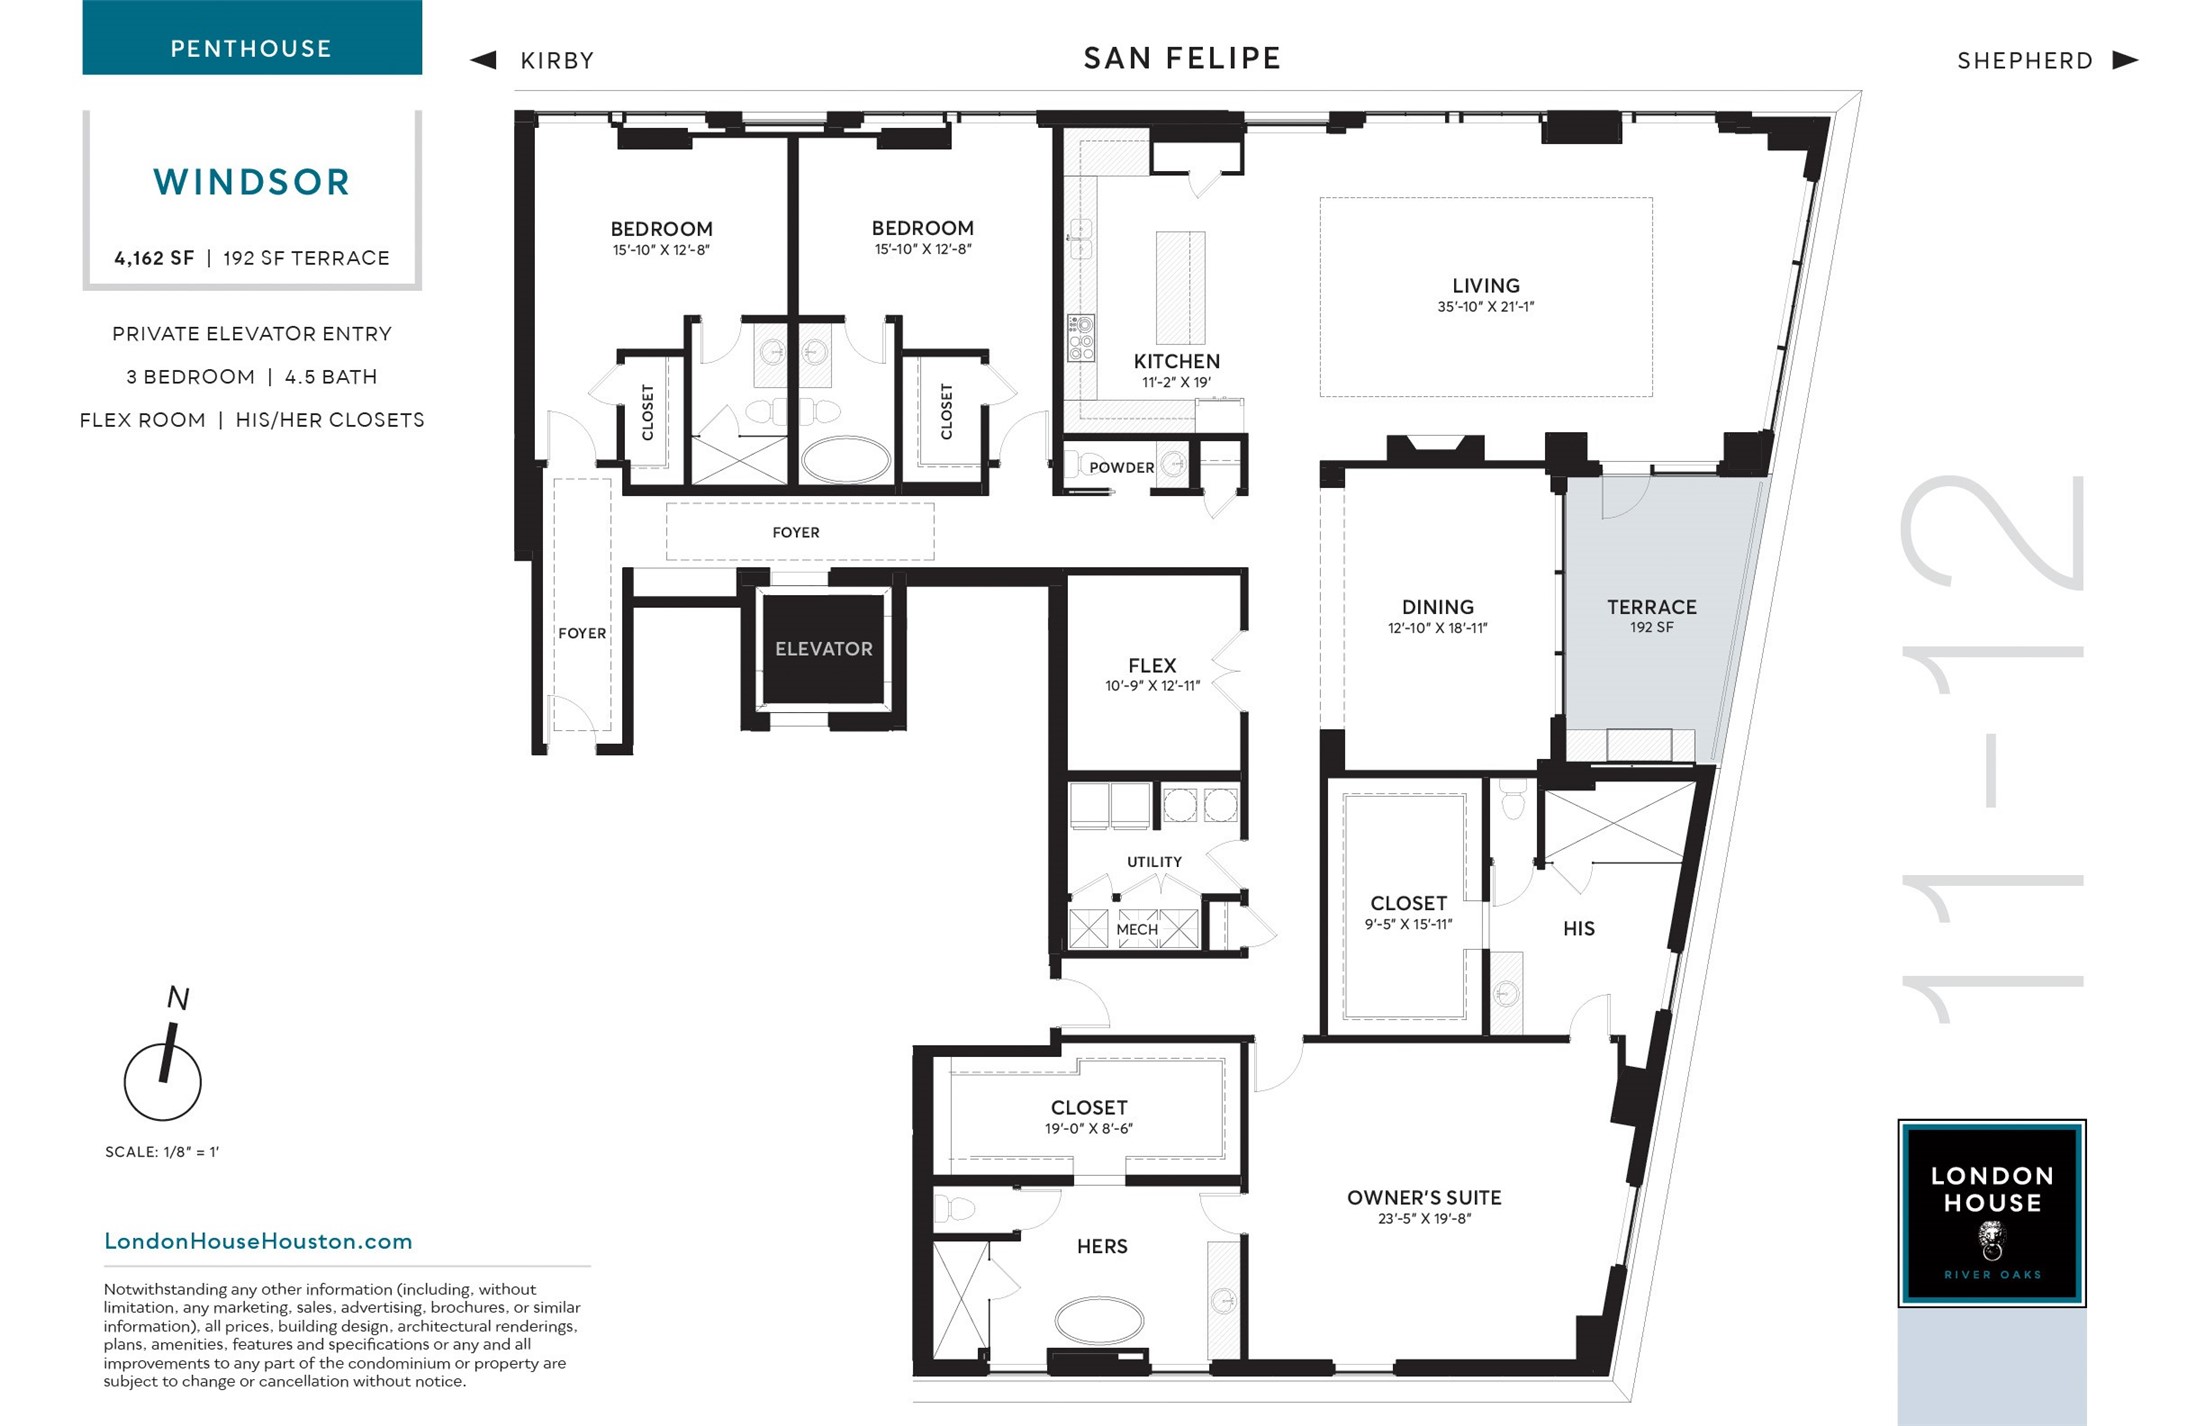 WINDSOR Penthouse Floor plan. Three bedrooms, four and one-half baths containing 4,162 sq.ft.